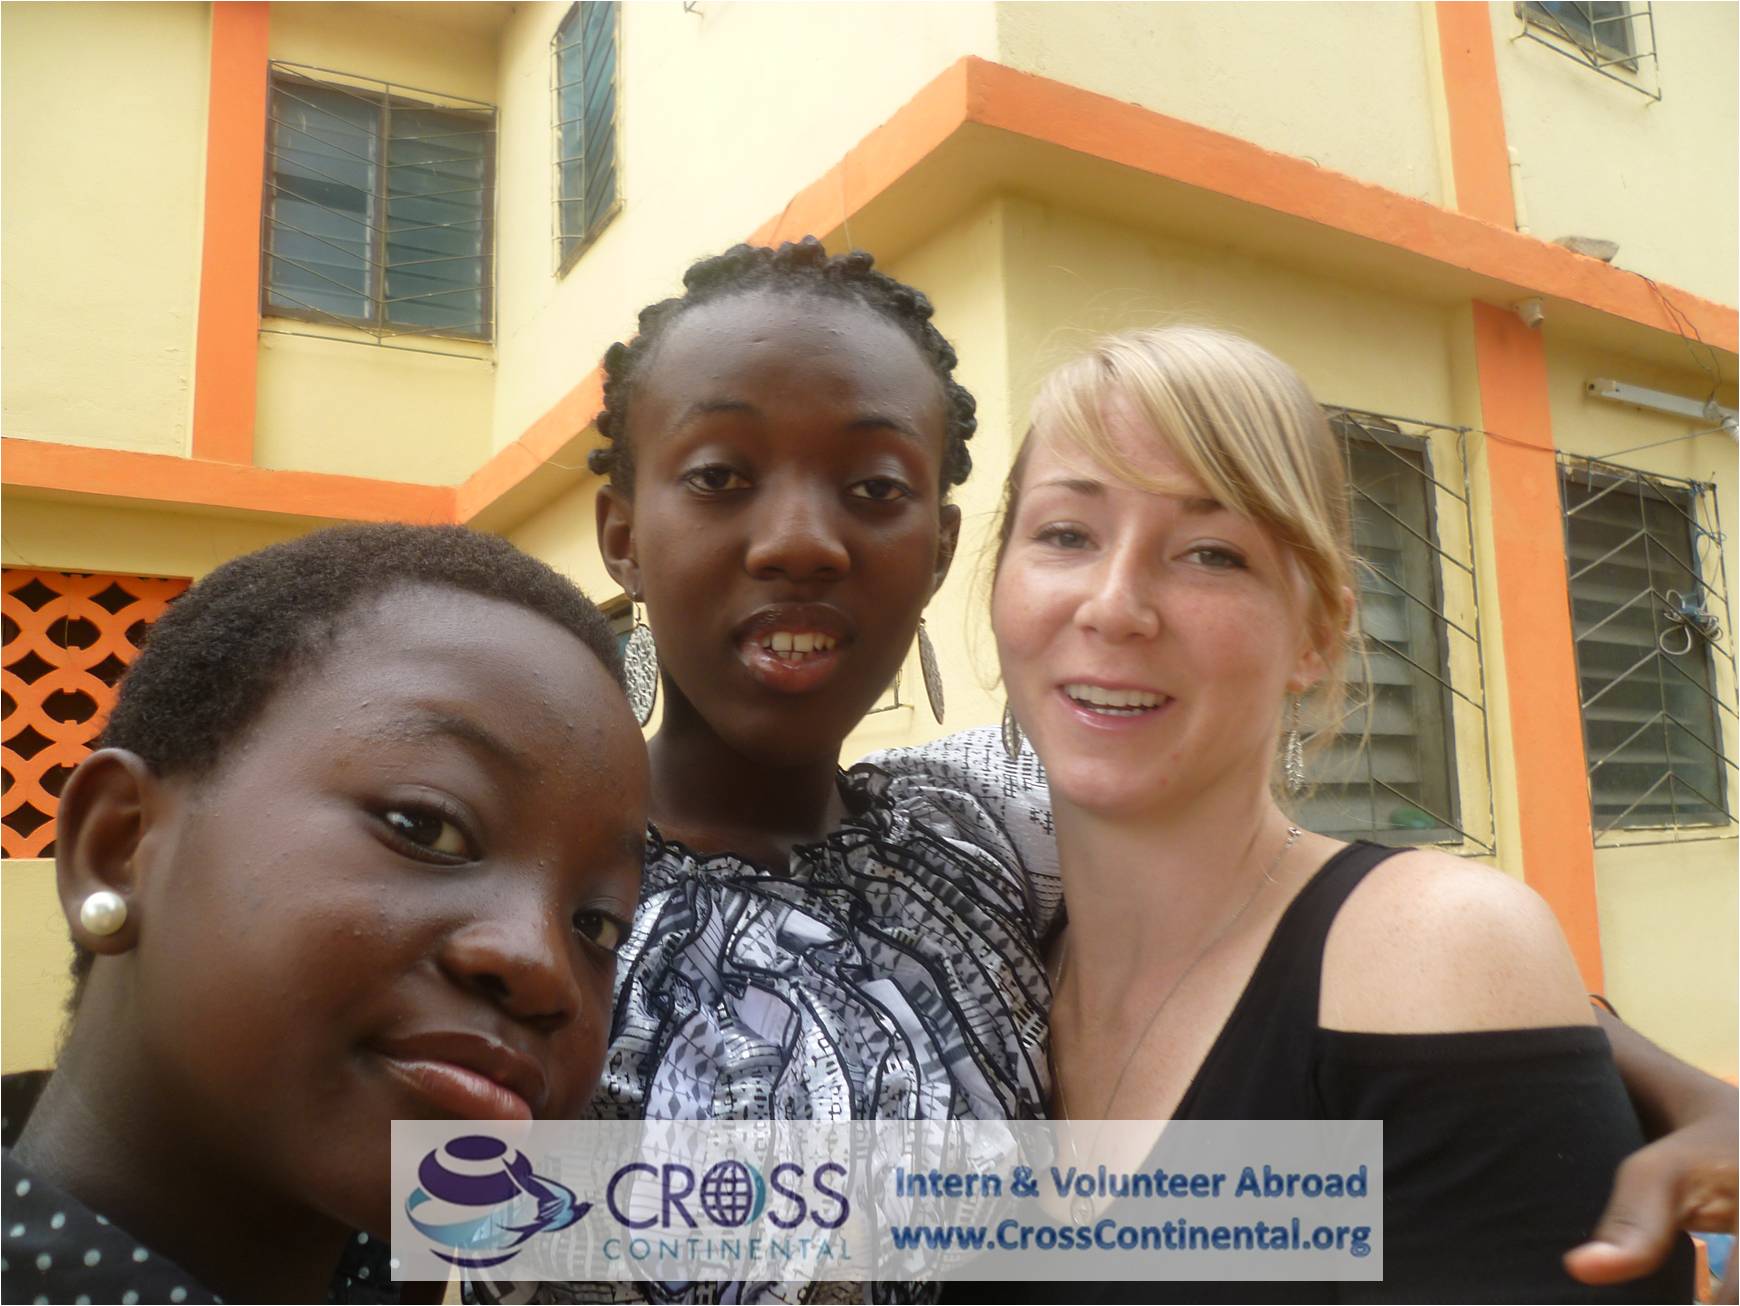 With Host Family: Volunteer Abroad Teaching and Assisting Orphans in Africa